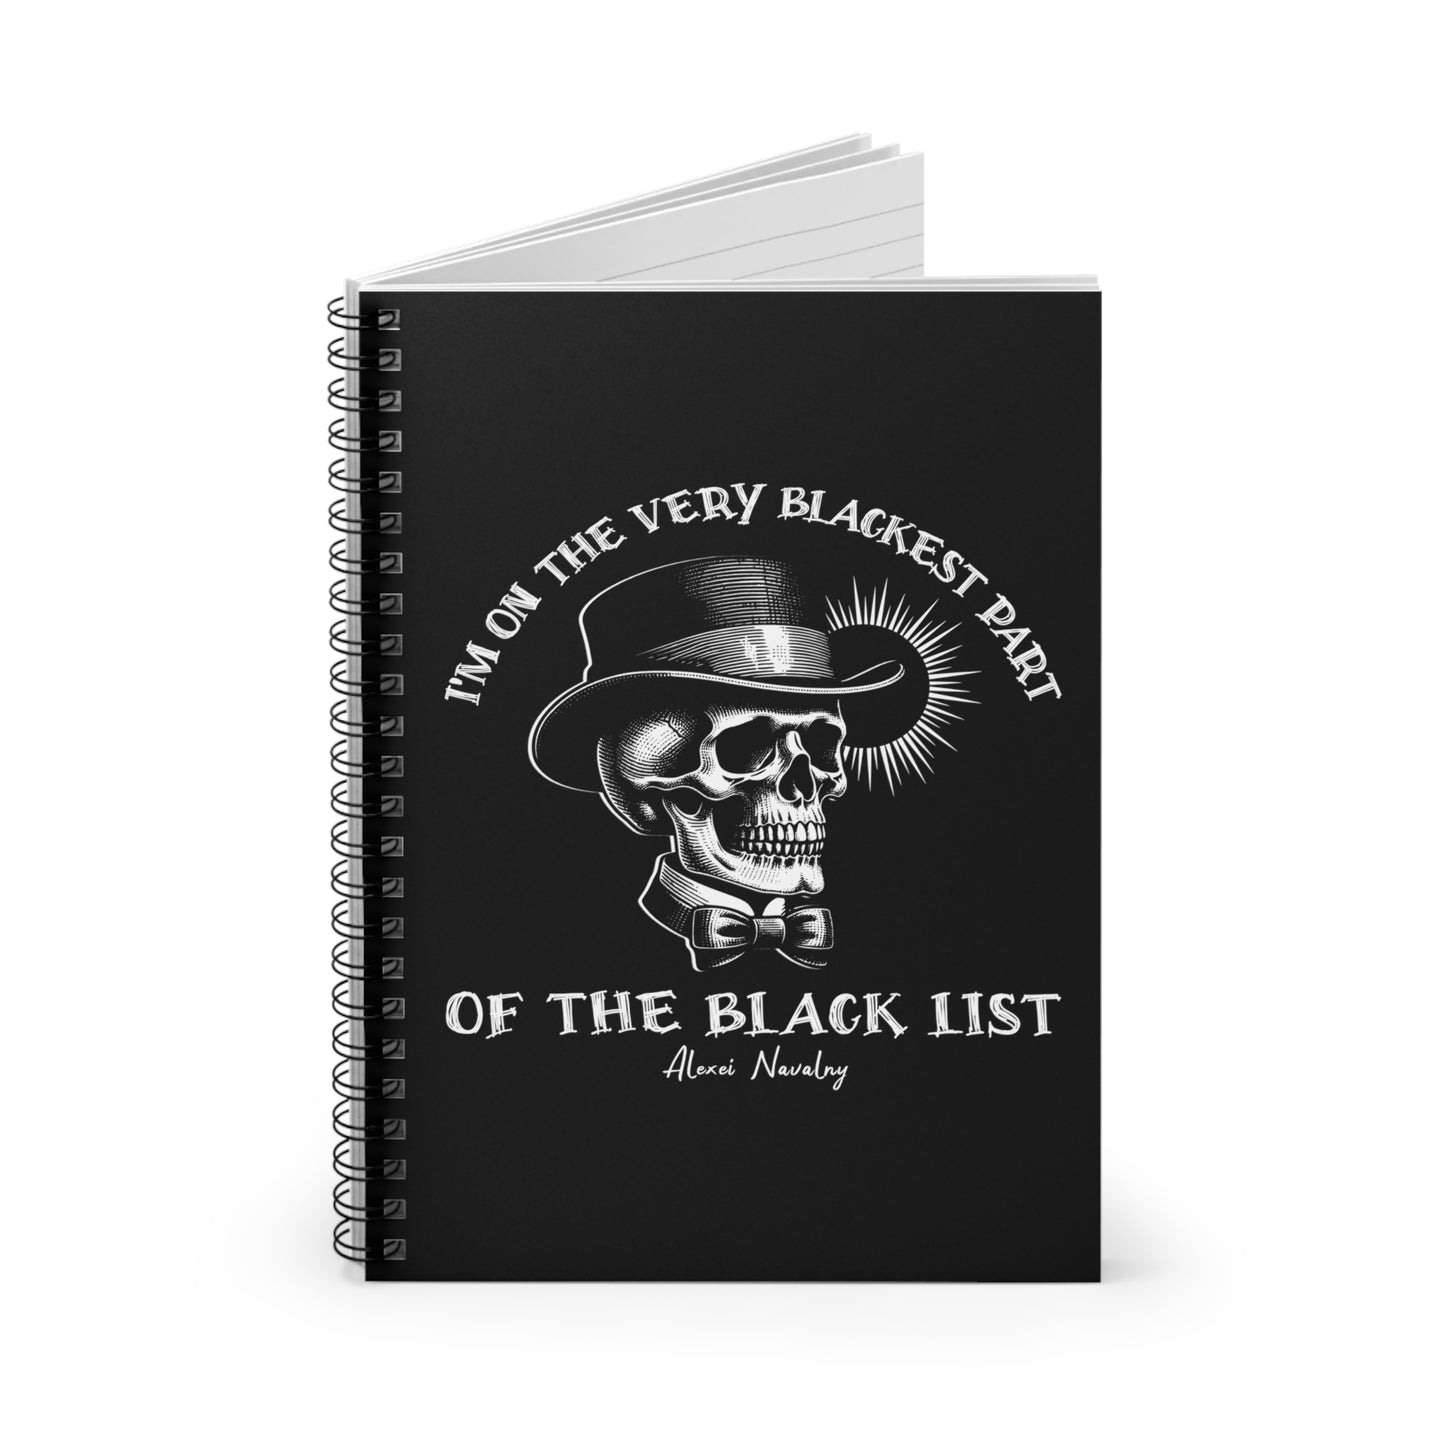 Black spiral notebook that pays tribute to those who resist oppression and strive for truth. Features Navalny quote "I'm on the very blackest part of the black list"